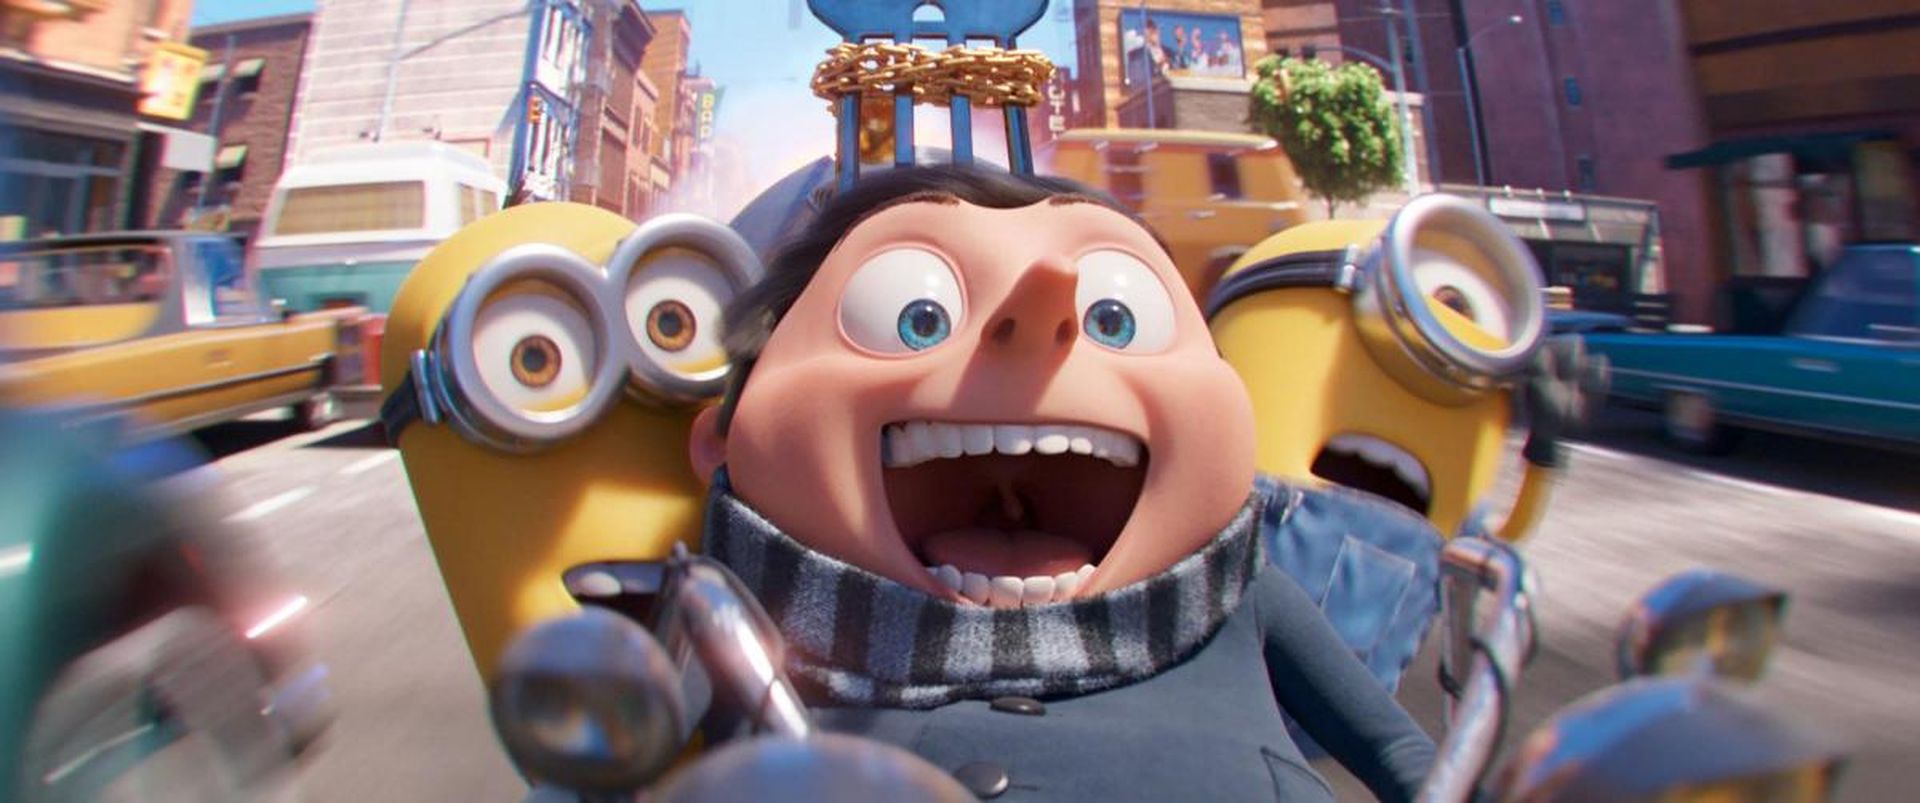 In this article, we are going to go over Minions movie TikTok trend which has been making waves around the globe for its hilarity and absurdness.